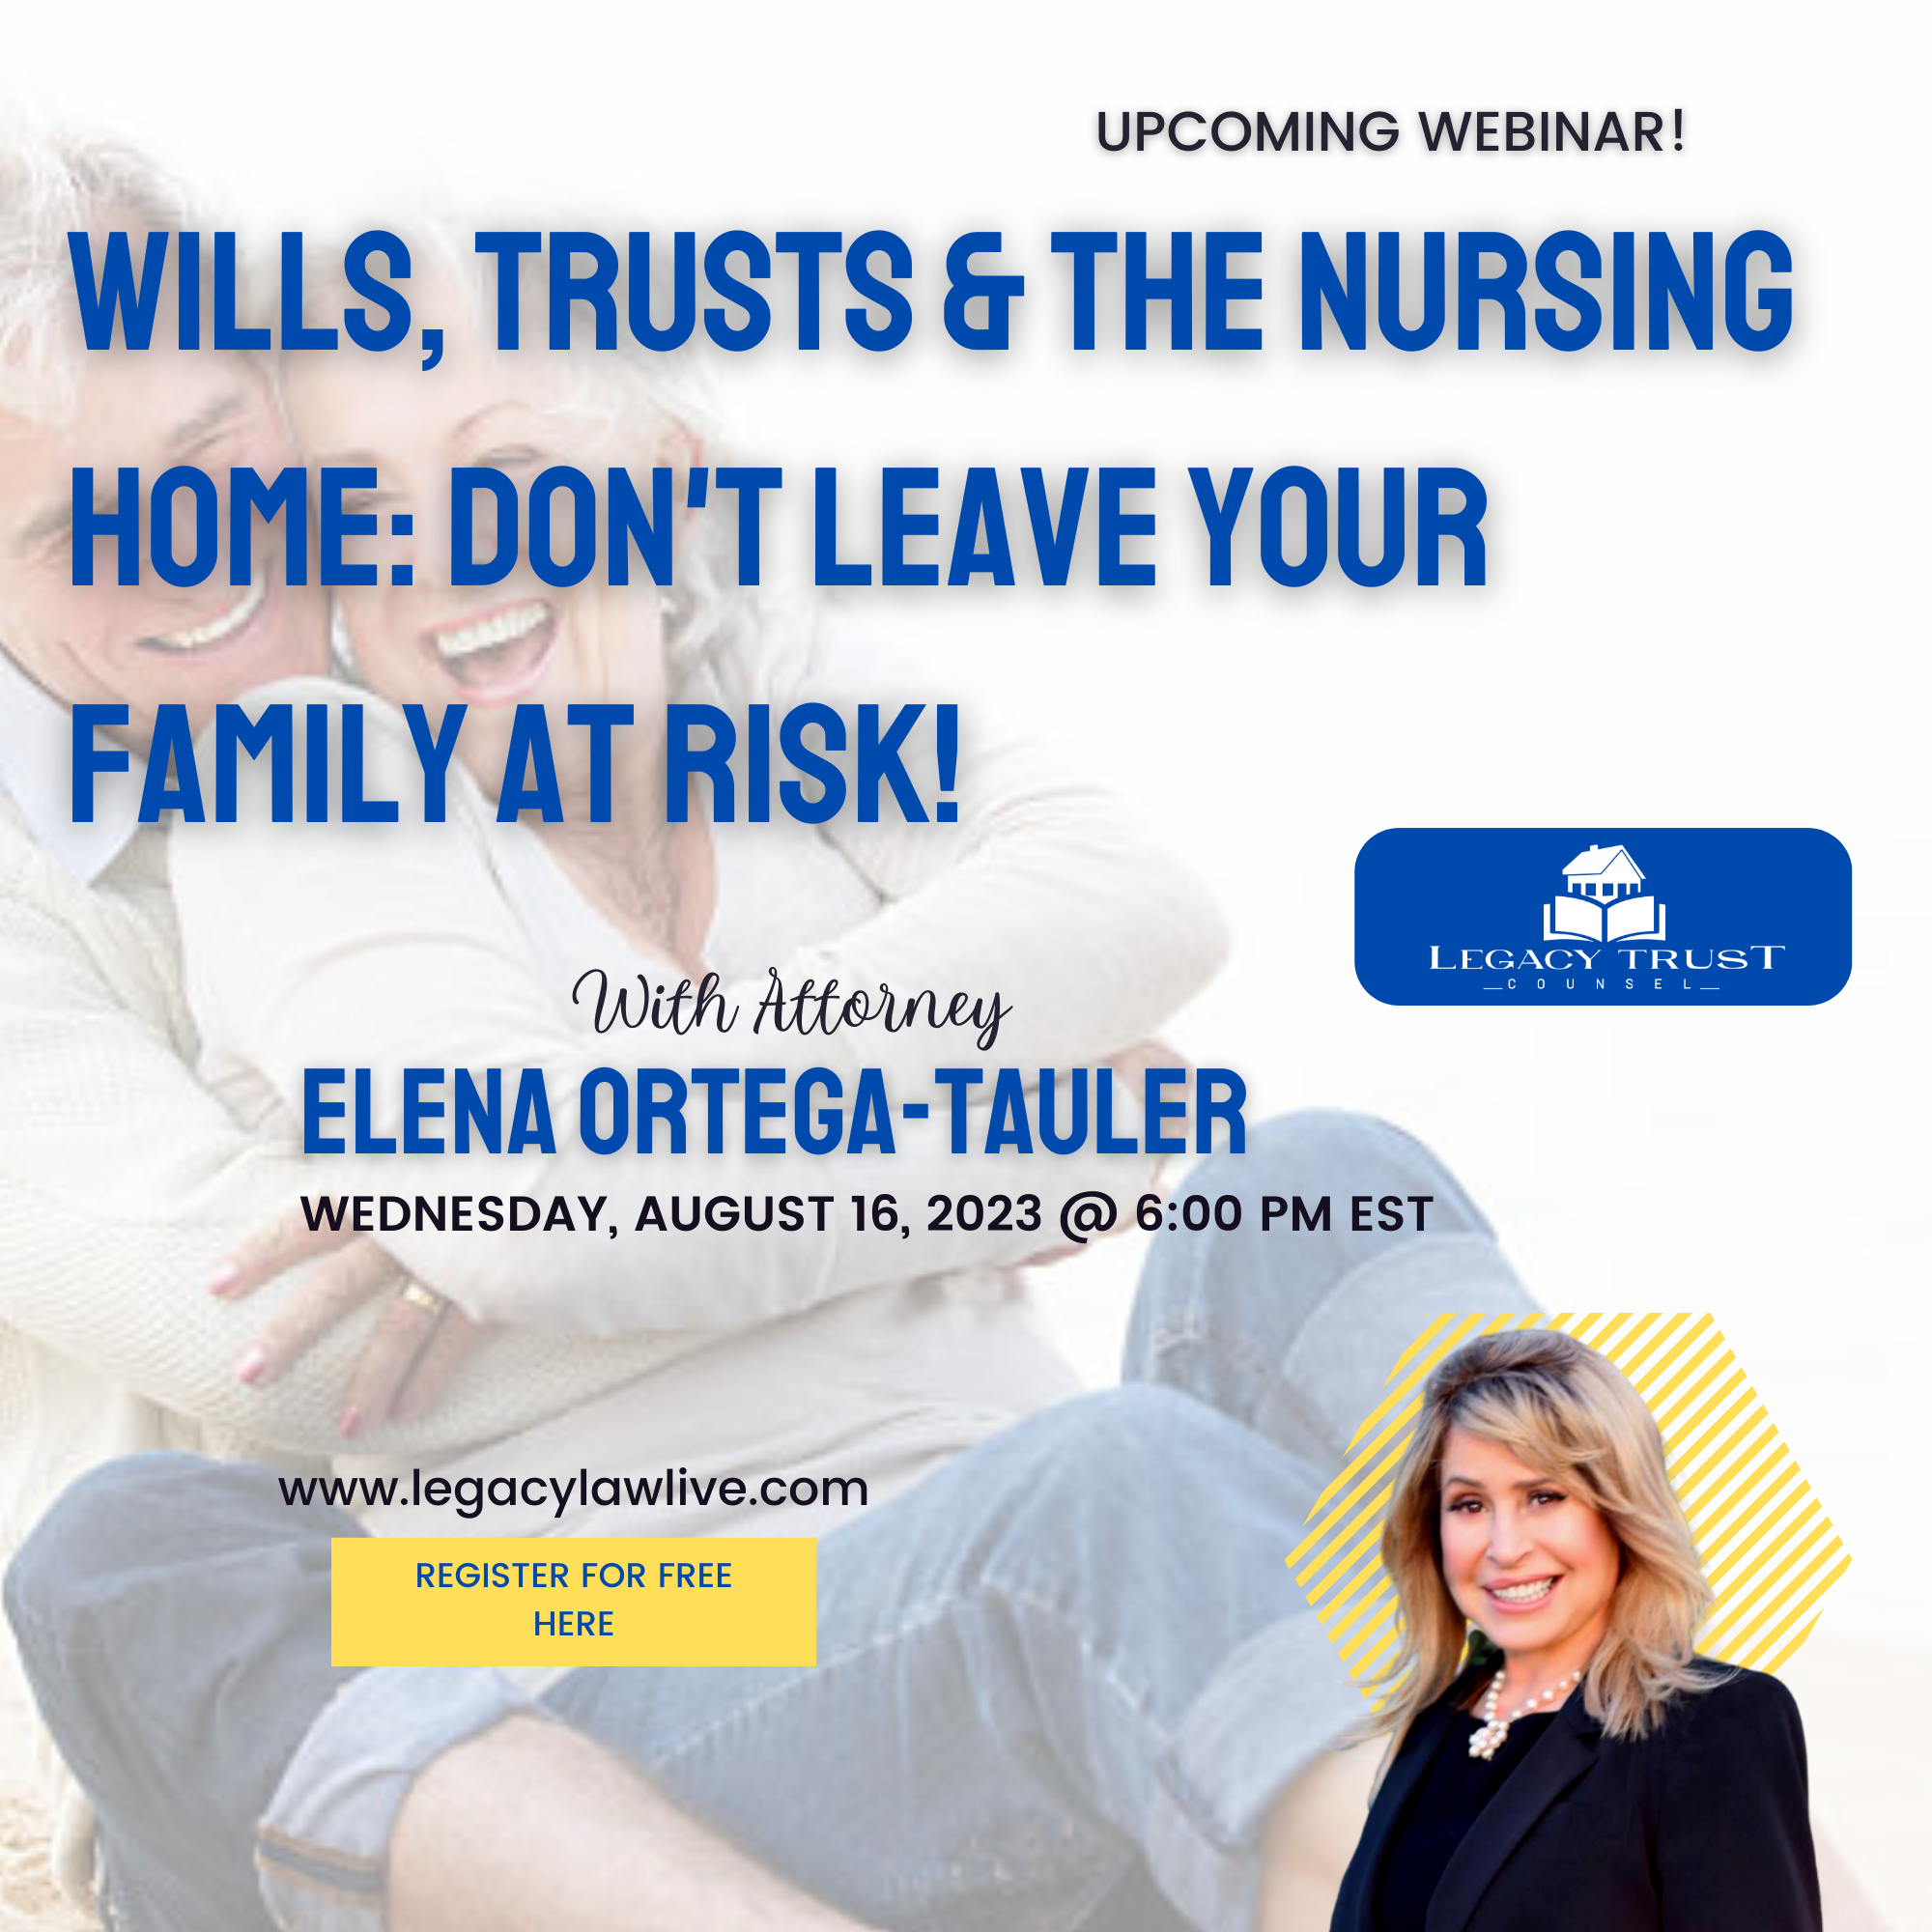 Legacy Trust Counsel Invite for Upcoming Free Live Webinar! Wills, Trusts & The Nursing Home: Don't Leave Your Family at Risk!